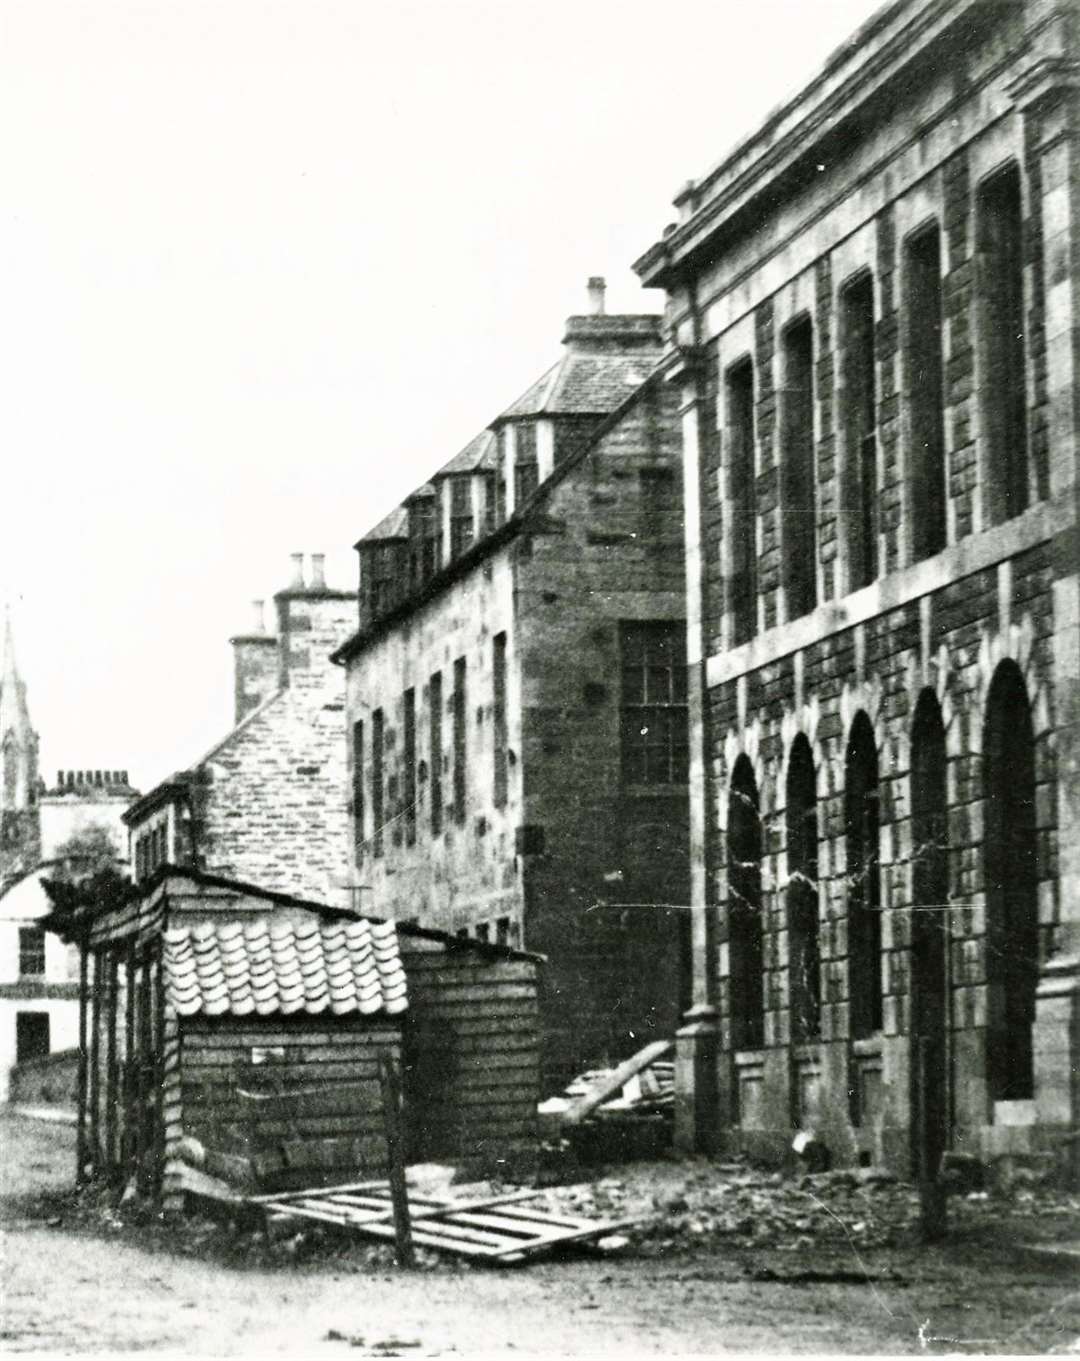 The former bank building on the extreme right during the period of construction showing rubble on the ground and workmen's sheds. Shared by Thurso historian Alan McIvor.